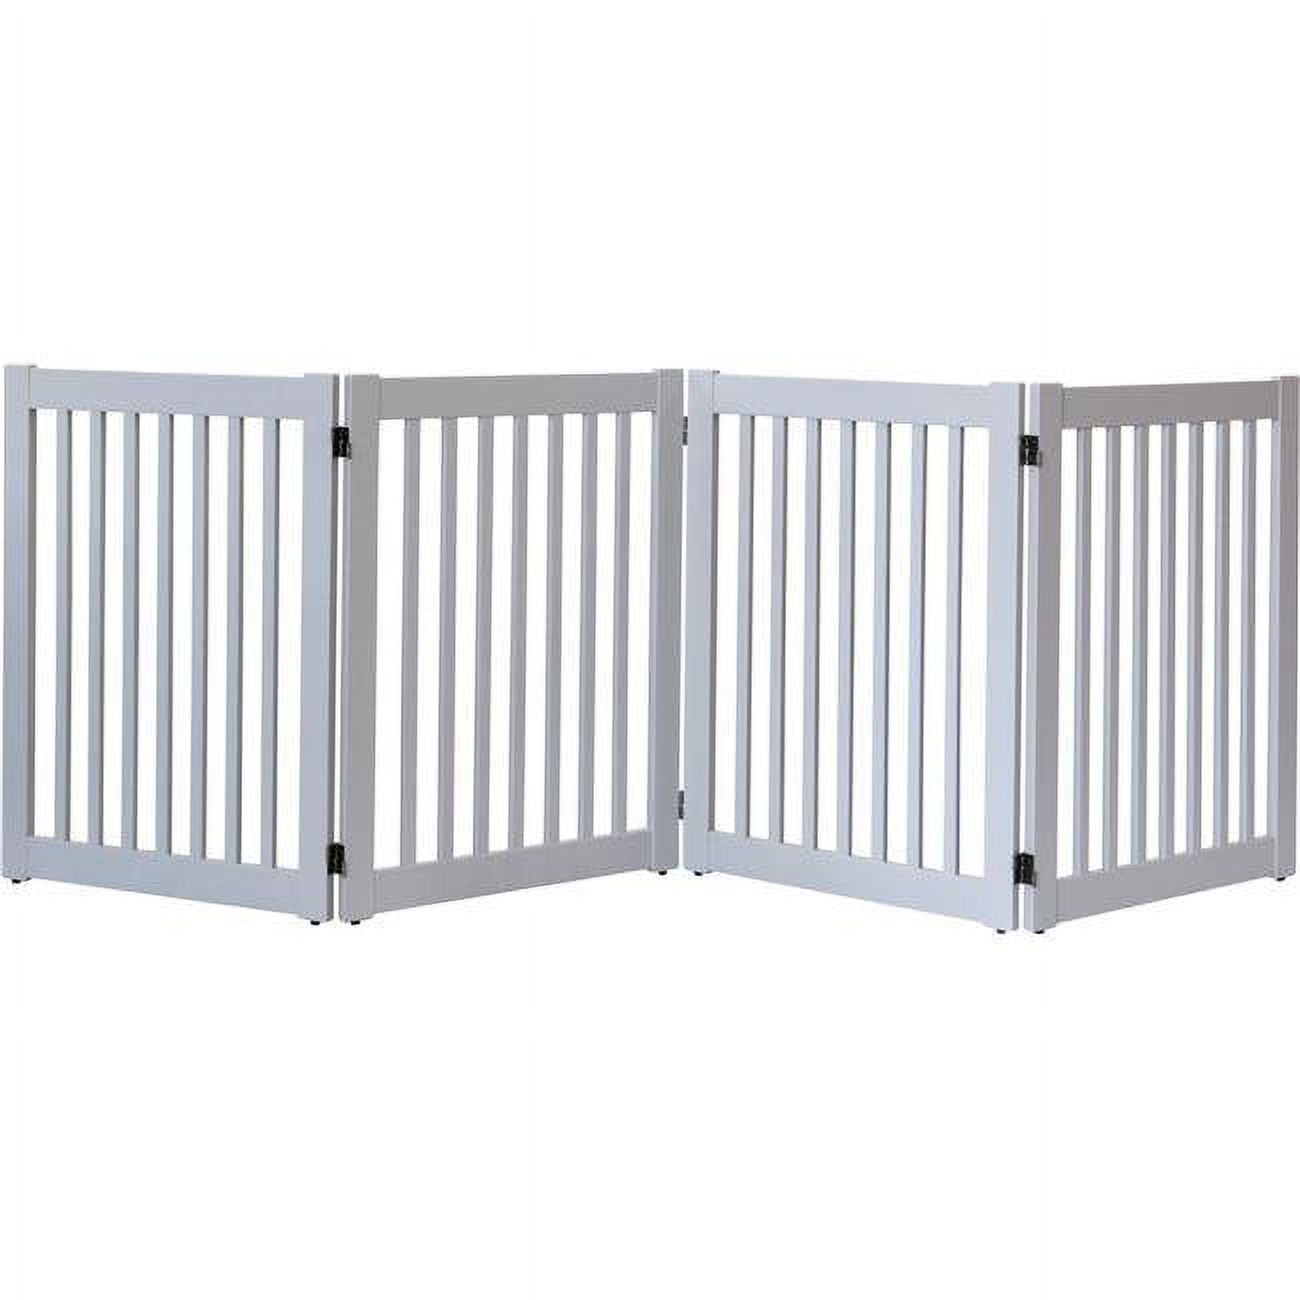 Dynamic Accents Da402 32 In. Highlander Series Solid Wood Pet Gate, Pumice Grey - 4 Panel